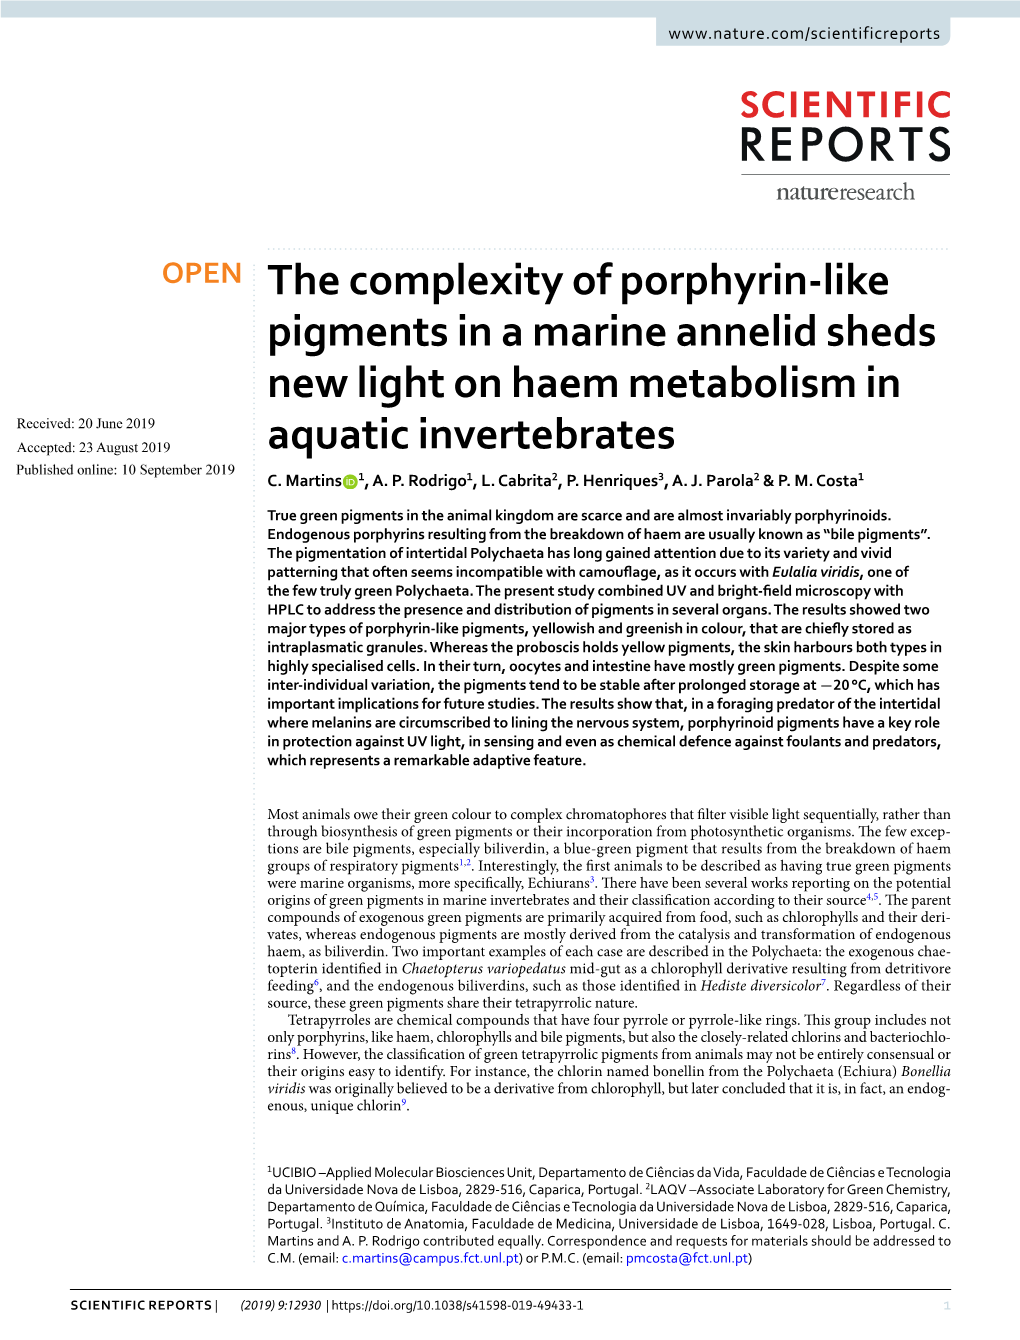 The Complexity of Porphyrin-Like Pigments